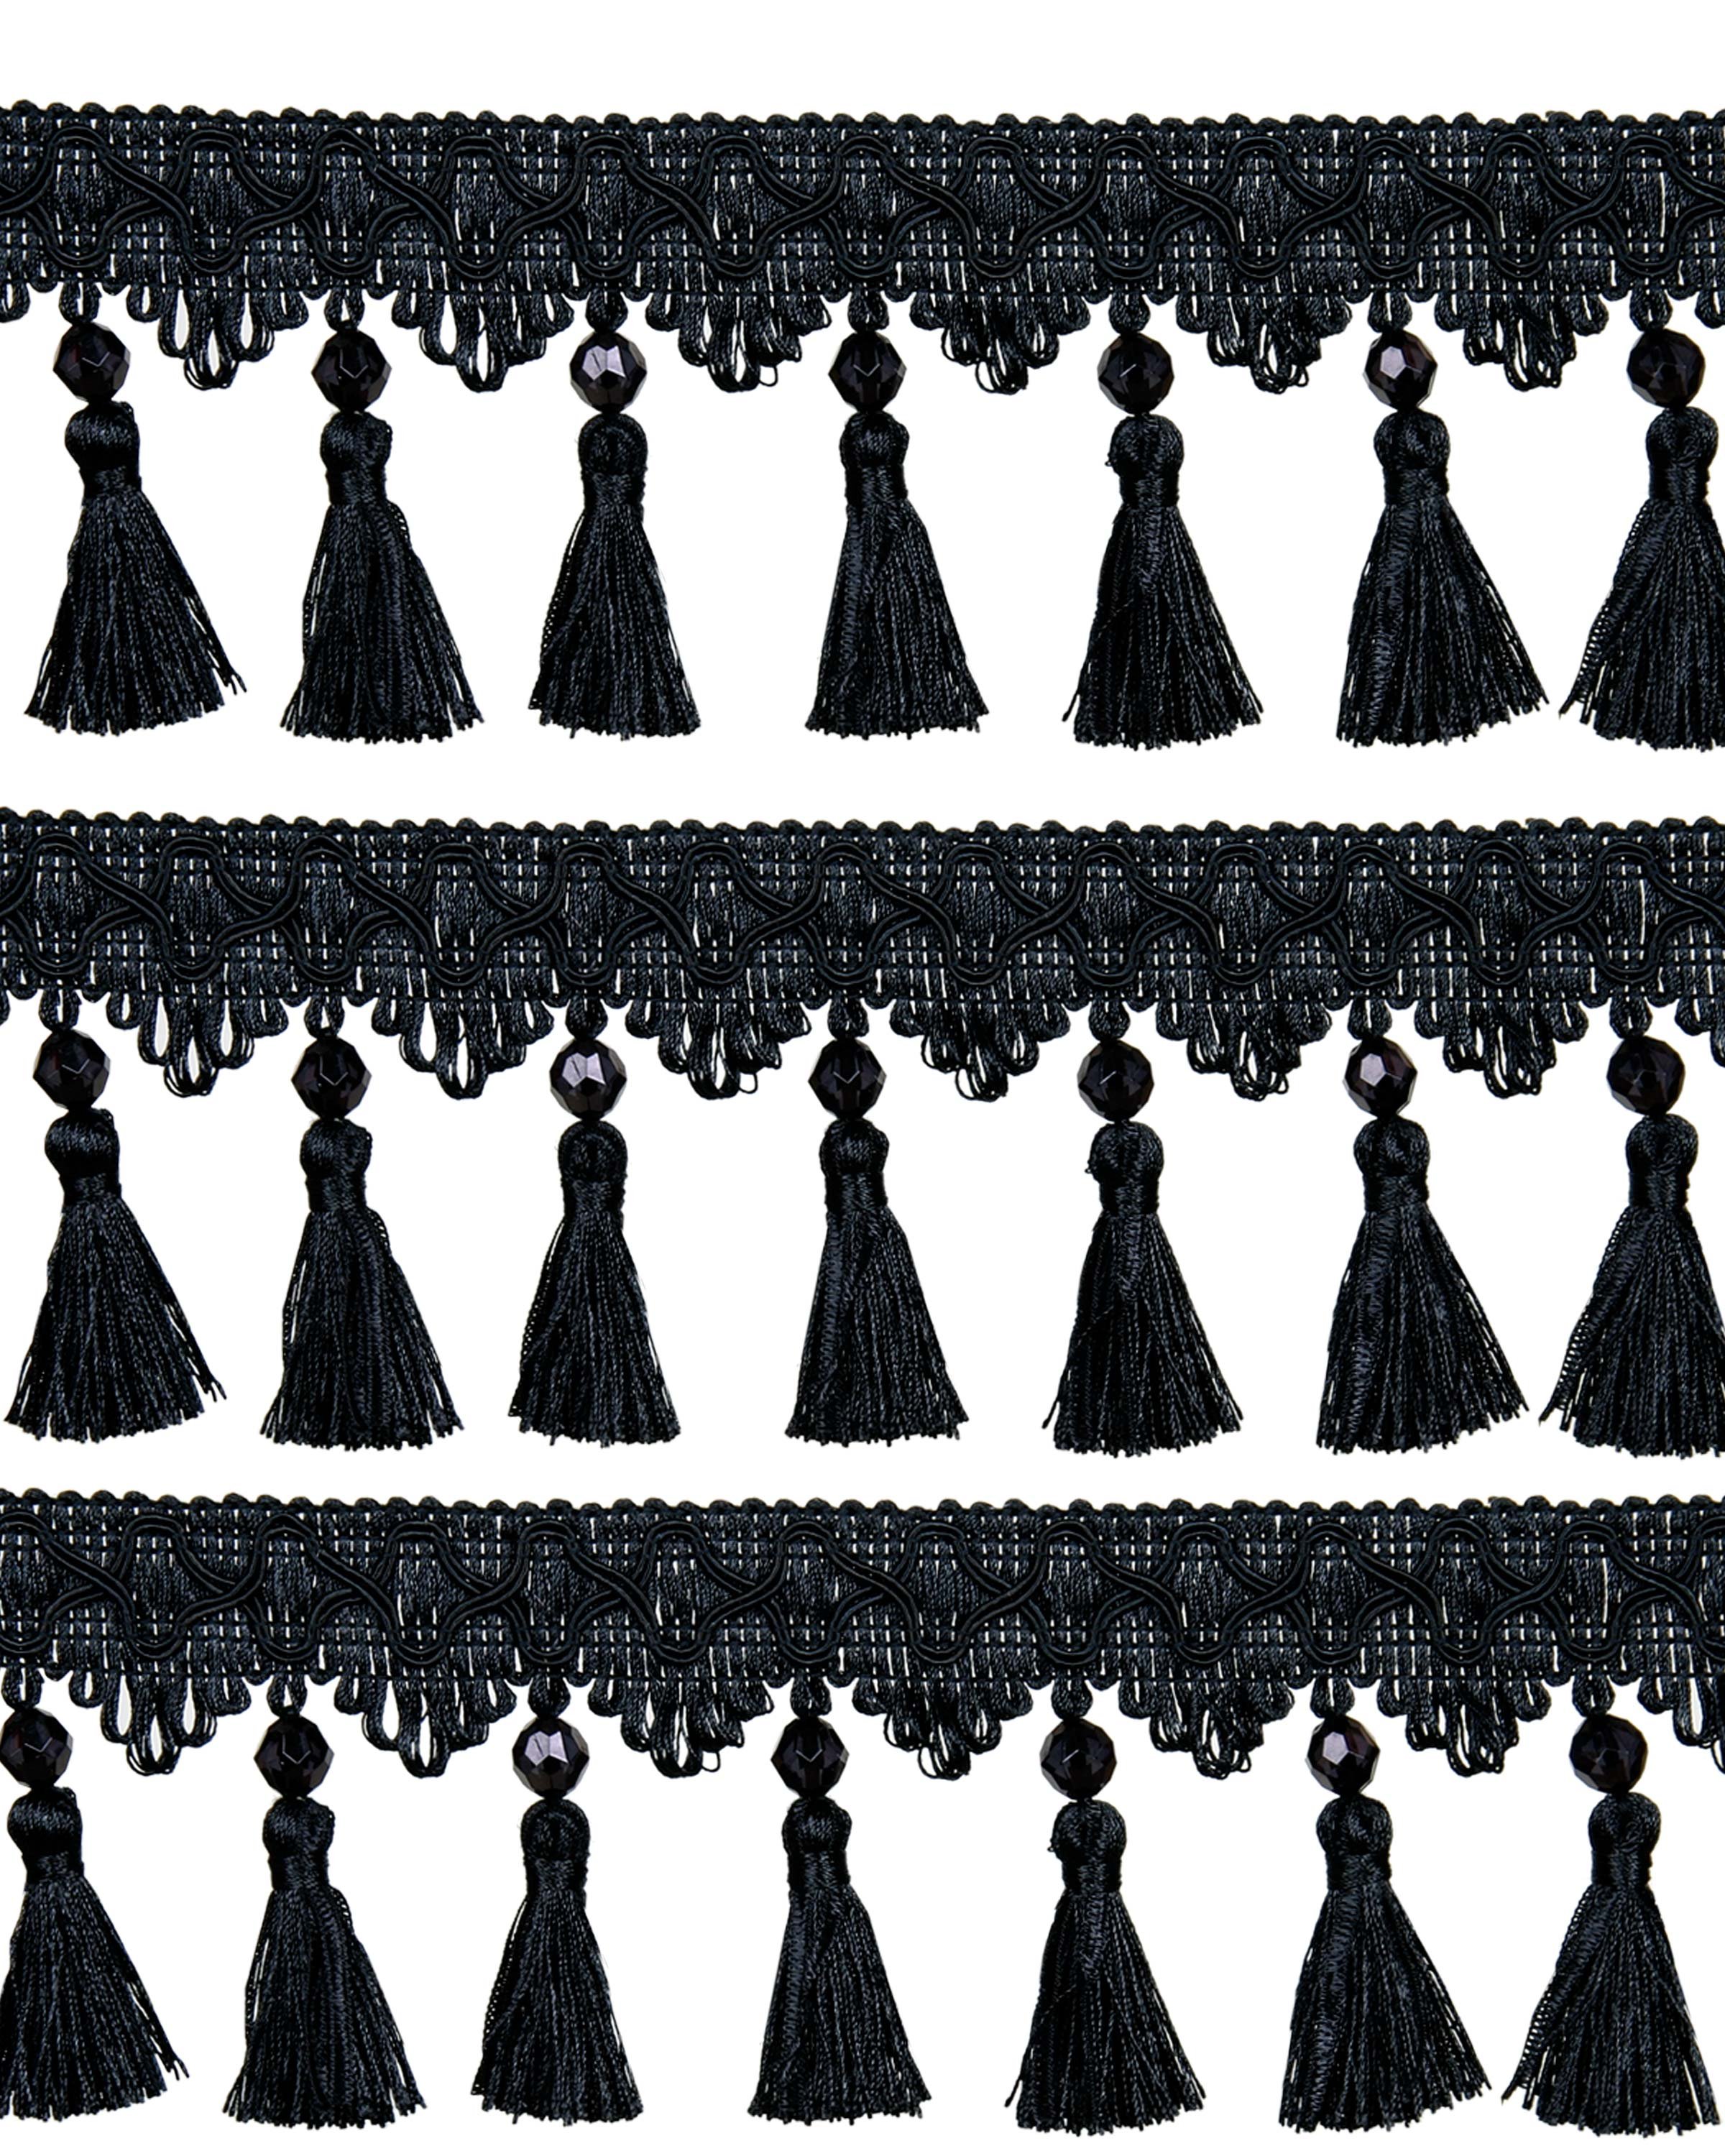 Fringe Tassels with Beads/Ribbons - Black 90mm Price is per 5 metres